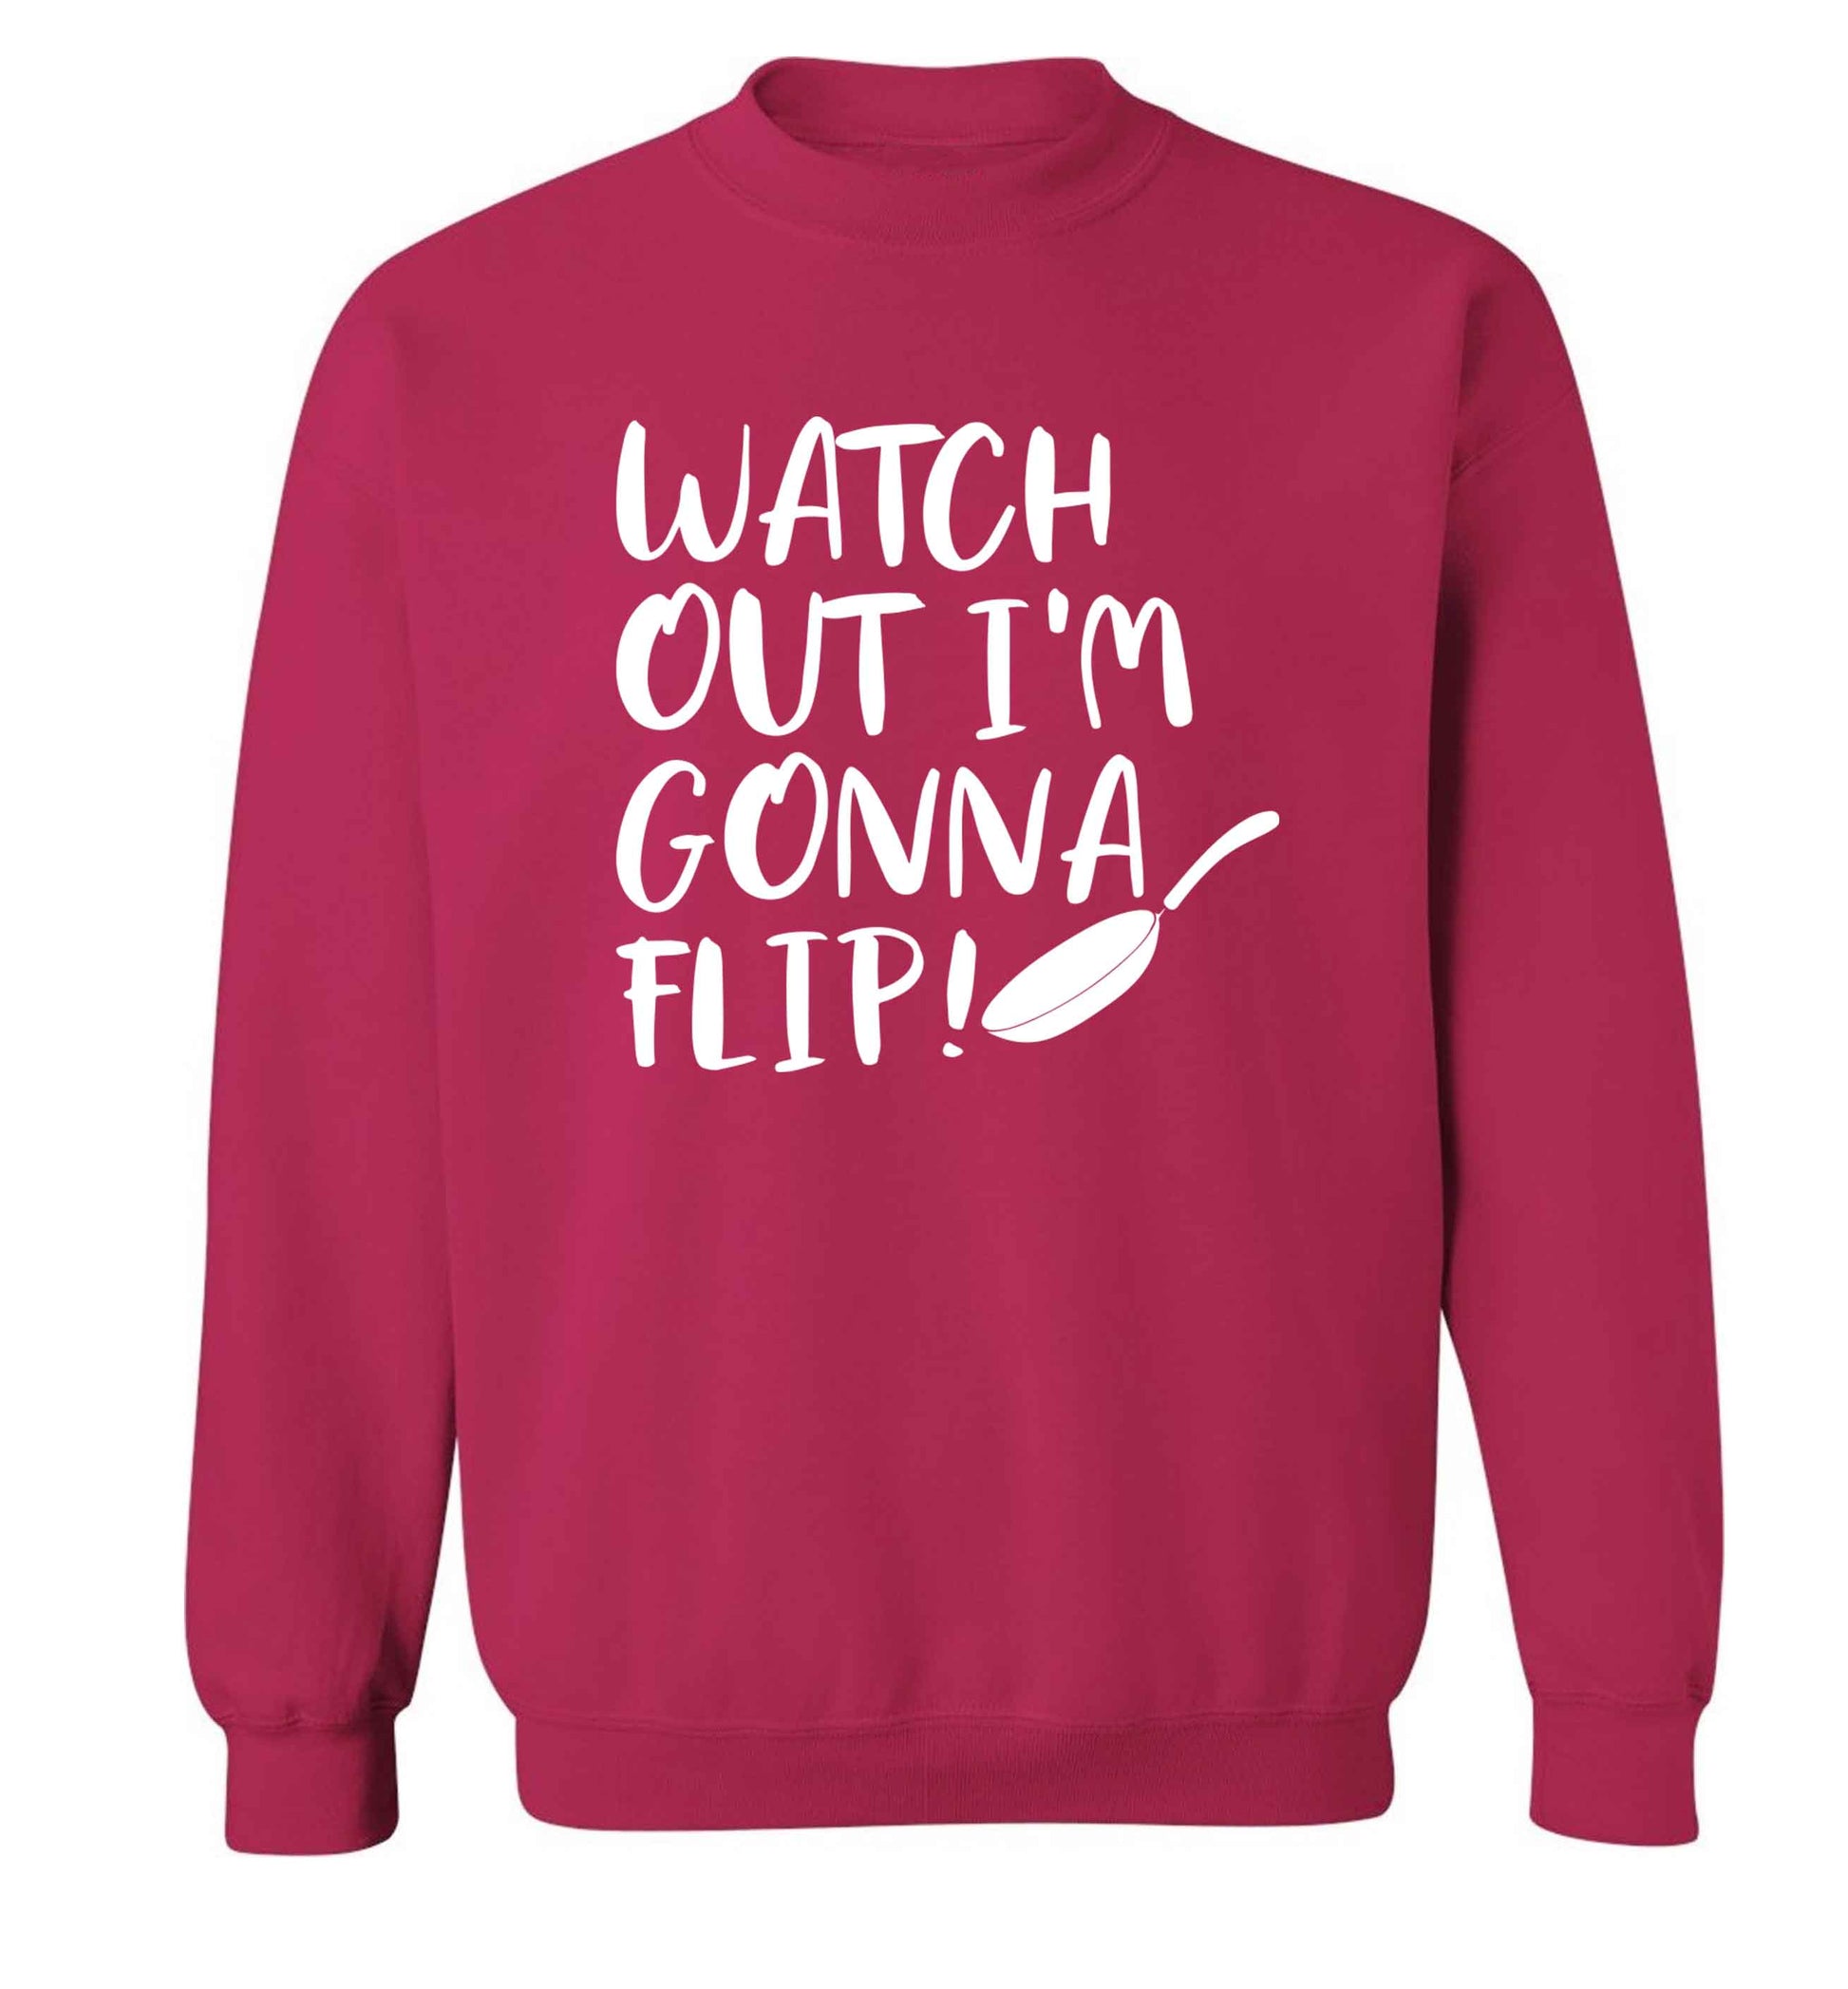 Watch out I'm gonna flip! adult's unisex pink sweater 2XL